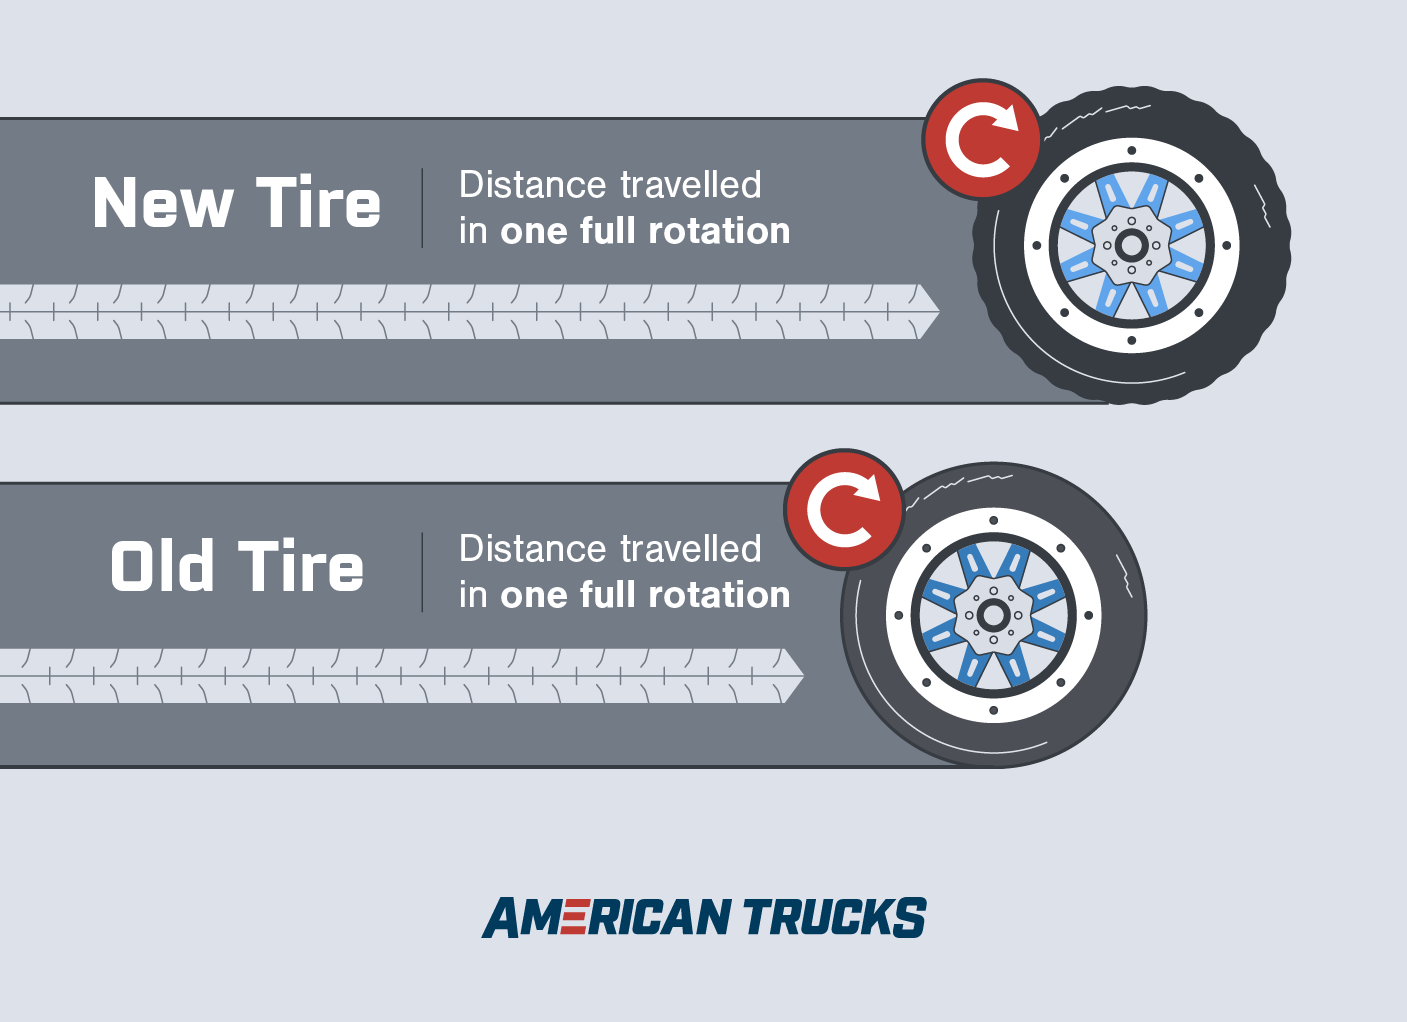 Graphic showing that a new tire will go further in one rotation than an older tire will